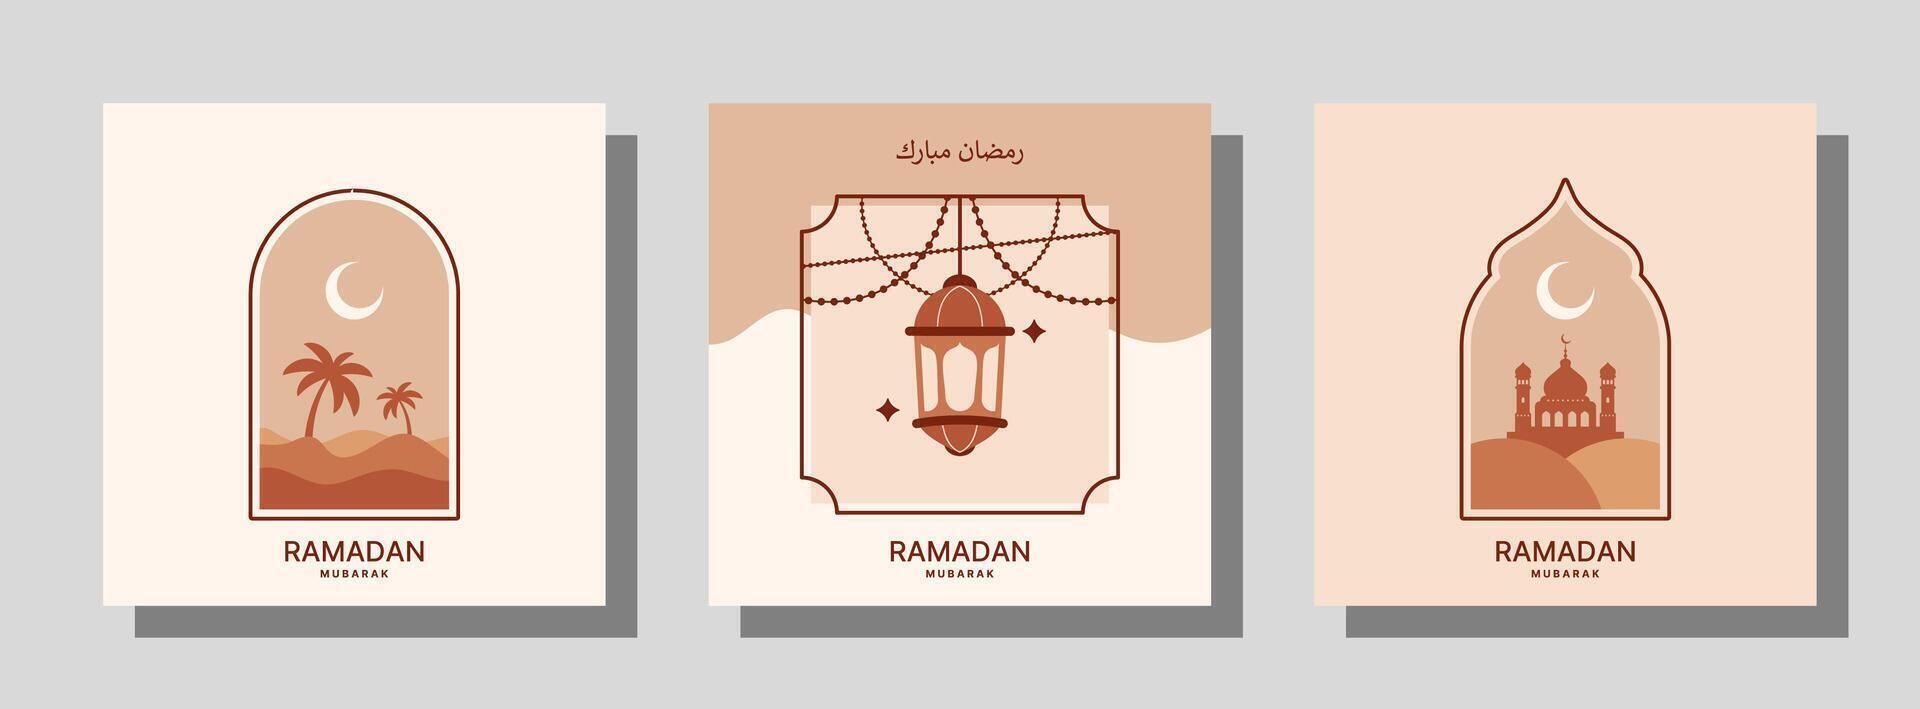 Set of vector ramadan mubarak templates for posters, cards, covers, and others. Modern design in desert tone color that blend with the elements.